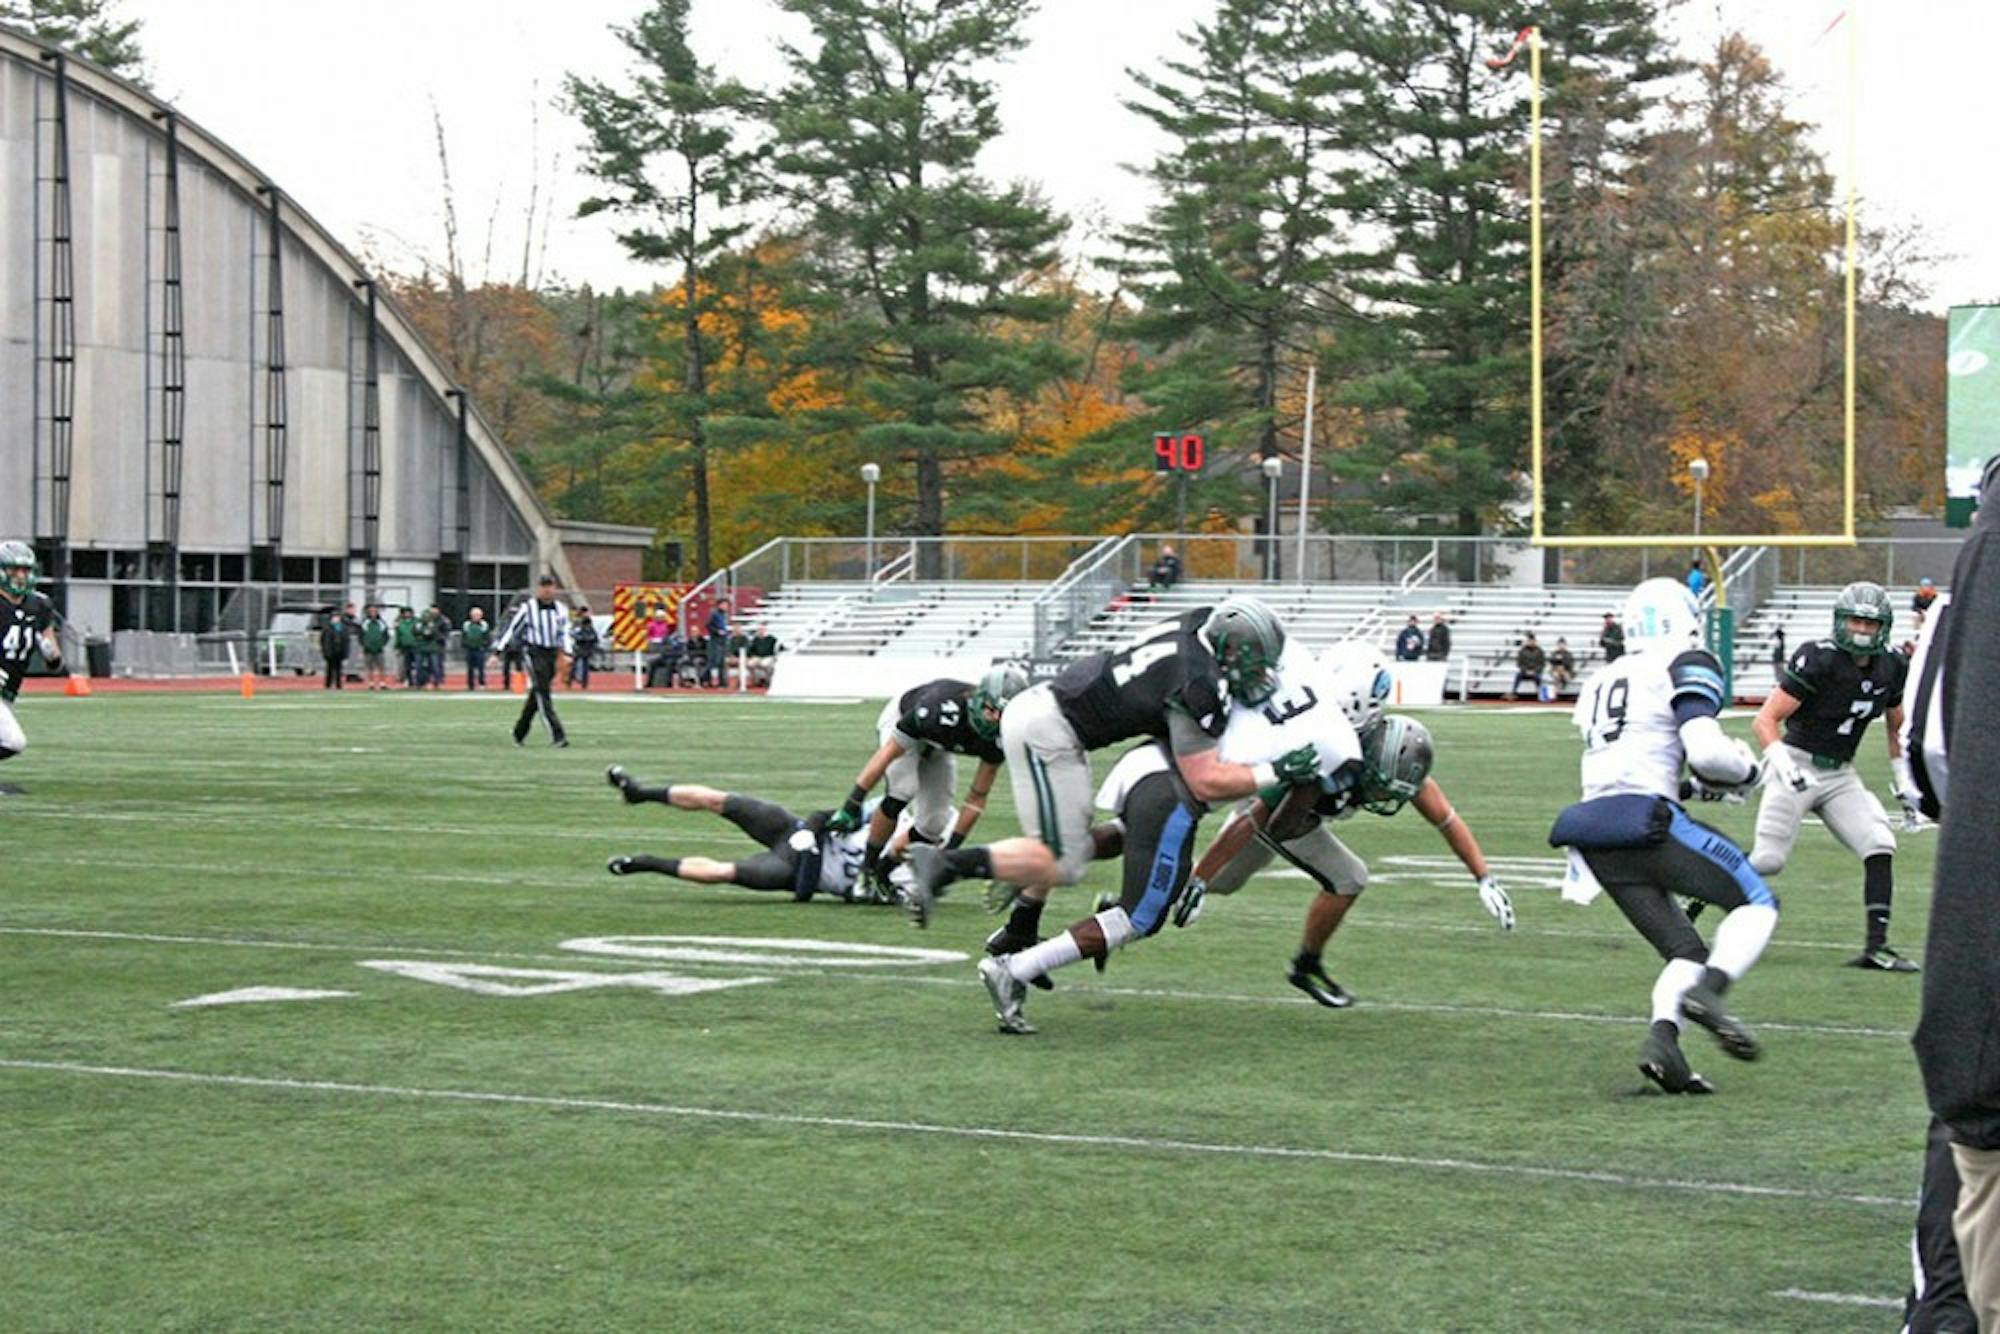 In 2010, Dartmouth eliminated all tackling from its practices to reduce injuries.